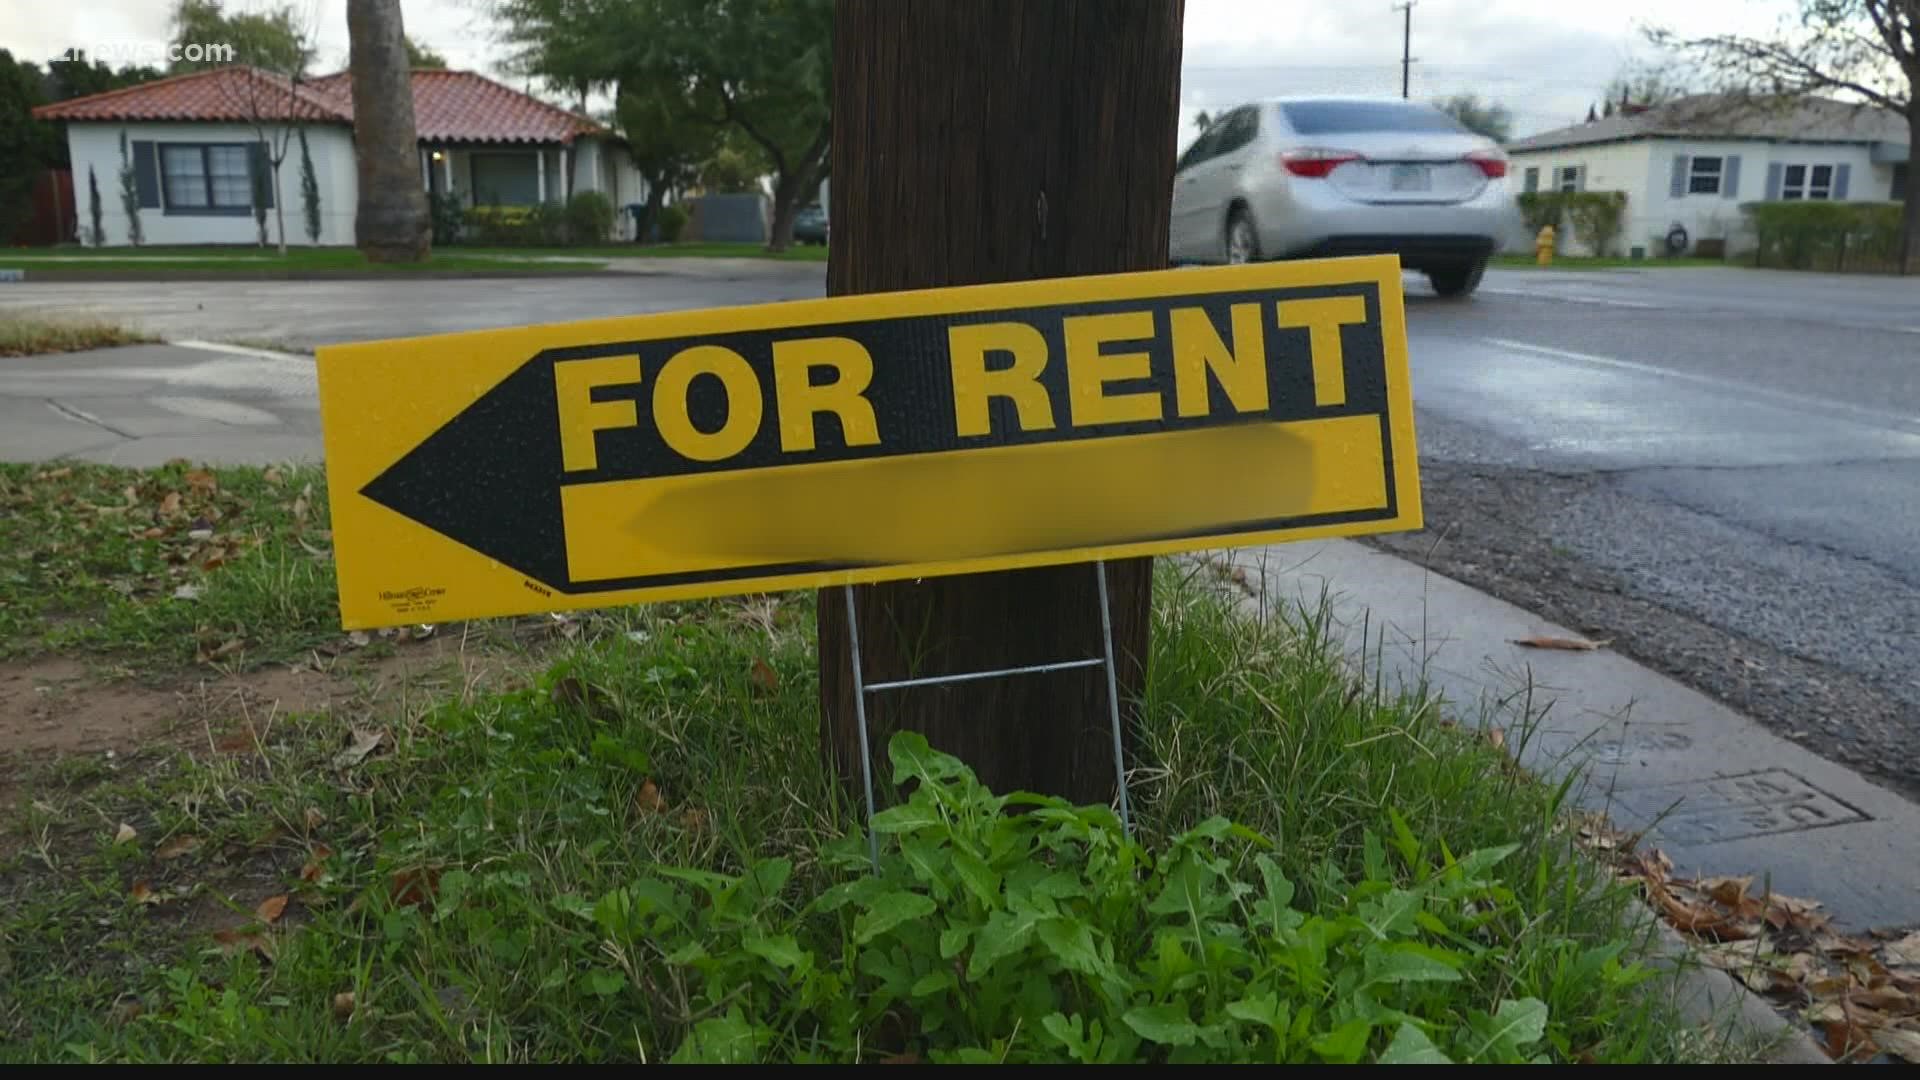 The hot housing market has thieves preying on people who can't win a bid on a house or even those looking to rent.